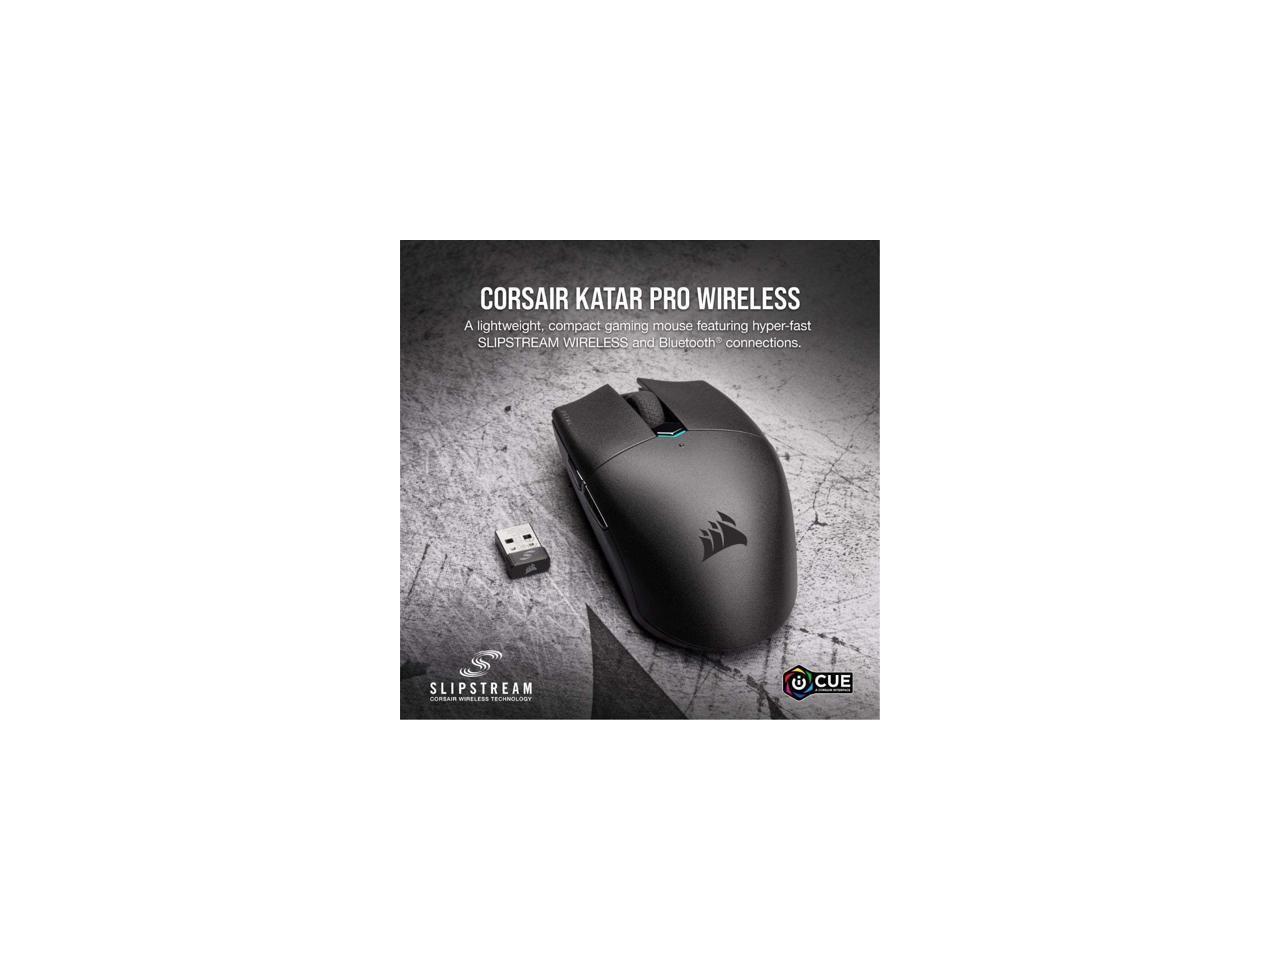 Corsair Katar Pro Wireless, Lightweight FPS/MOBA Gaming Mouse with 